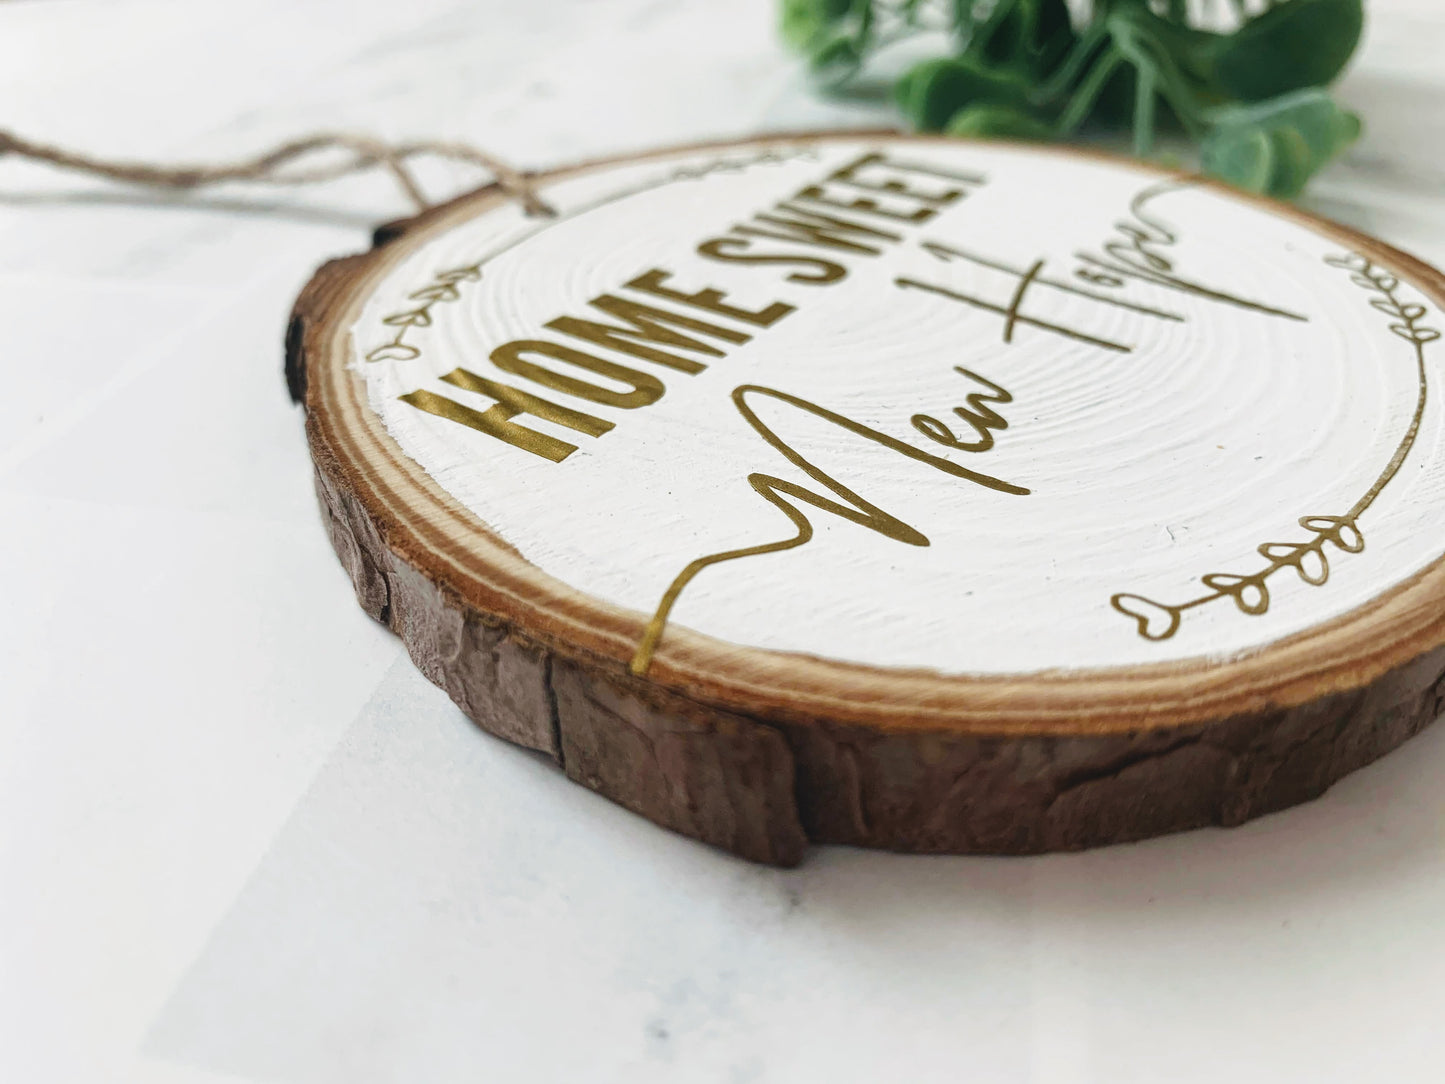 Home Sweet Town Tree Slice Ornament